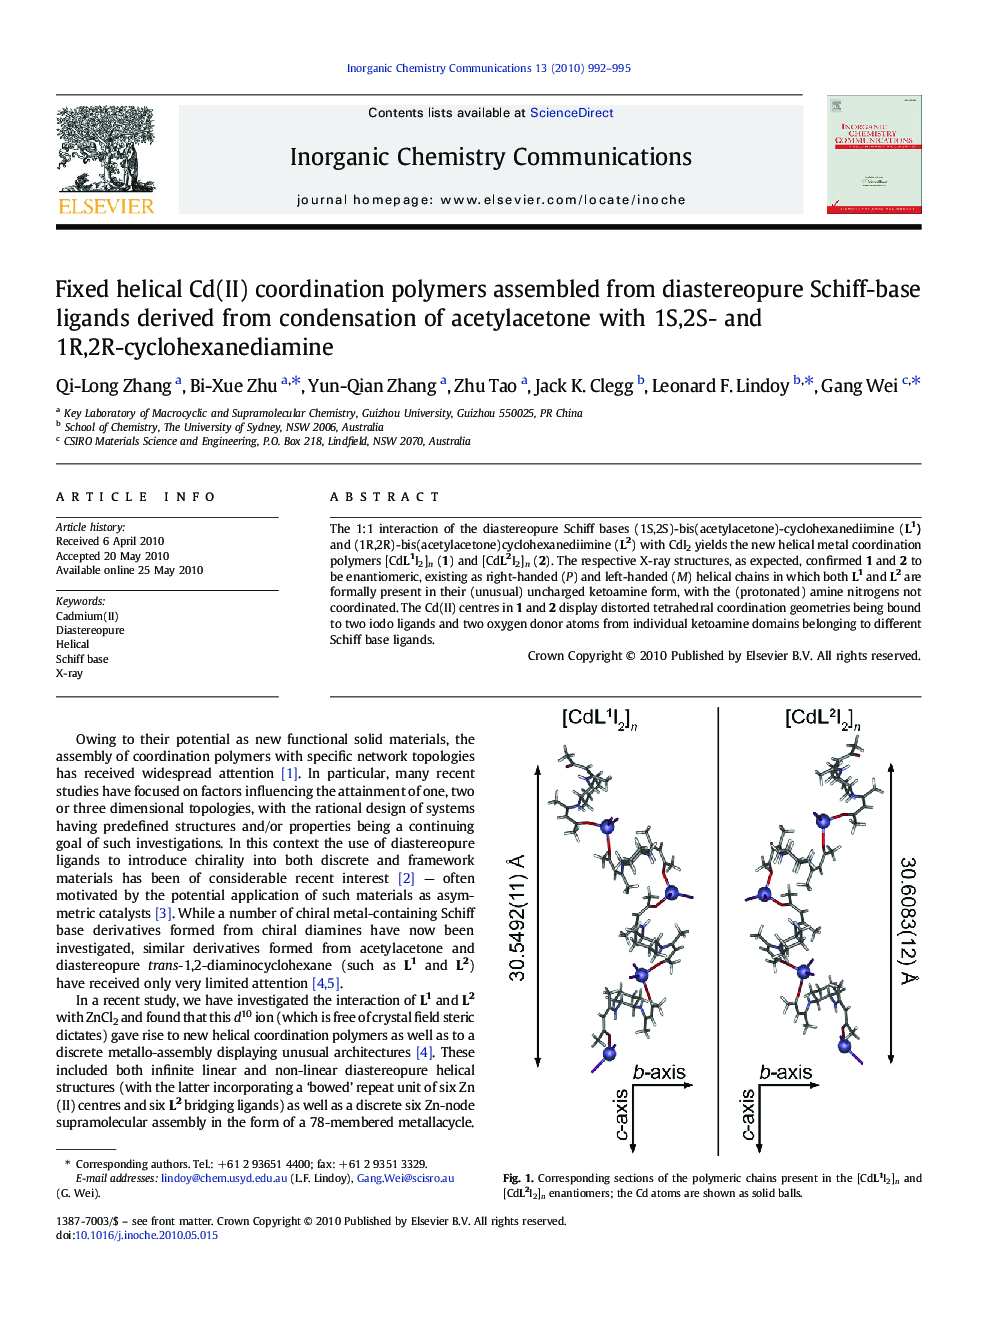 Fixed helical Cd(II) coordination polymers assembled from diastereopure Schiff-base ligands derived from condensation of acetylacetone with 1S,2S- and 1R,2R-cyclohexanediamine